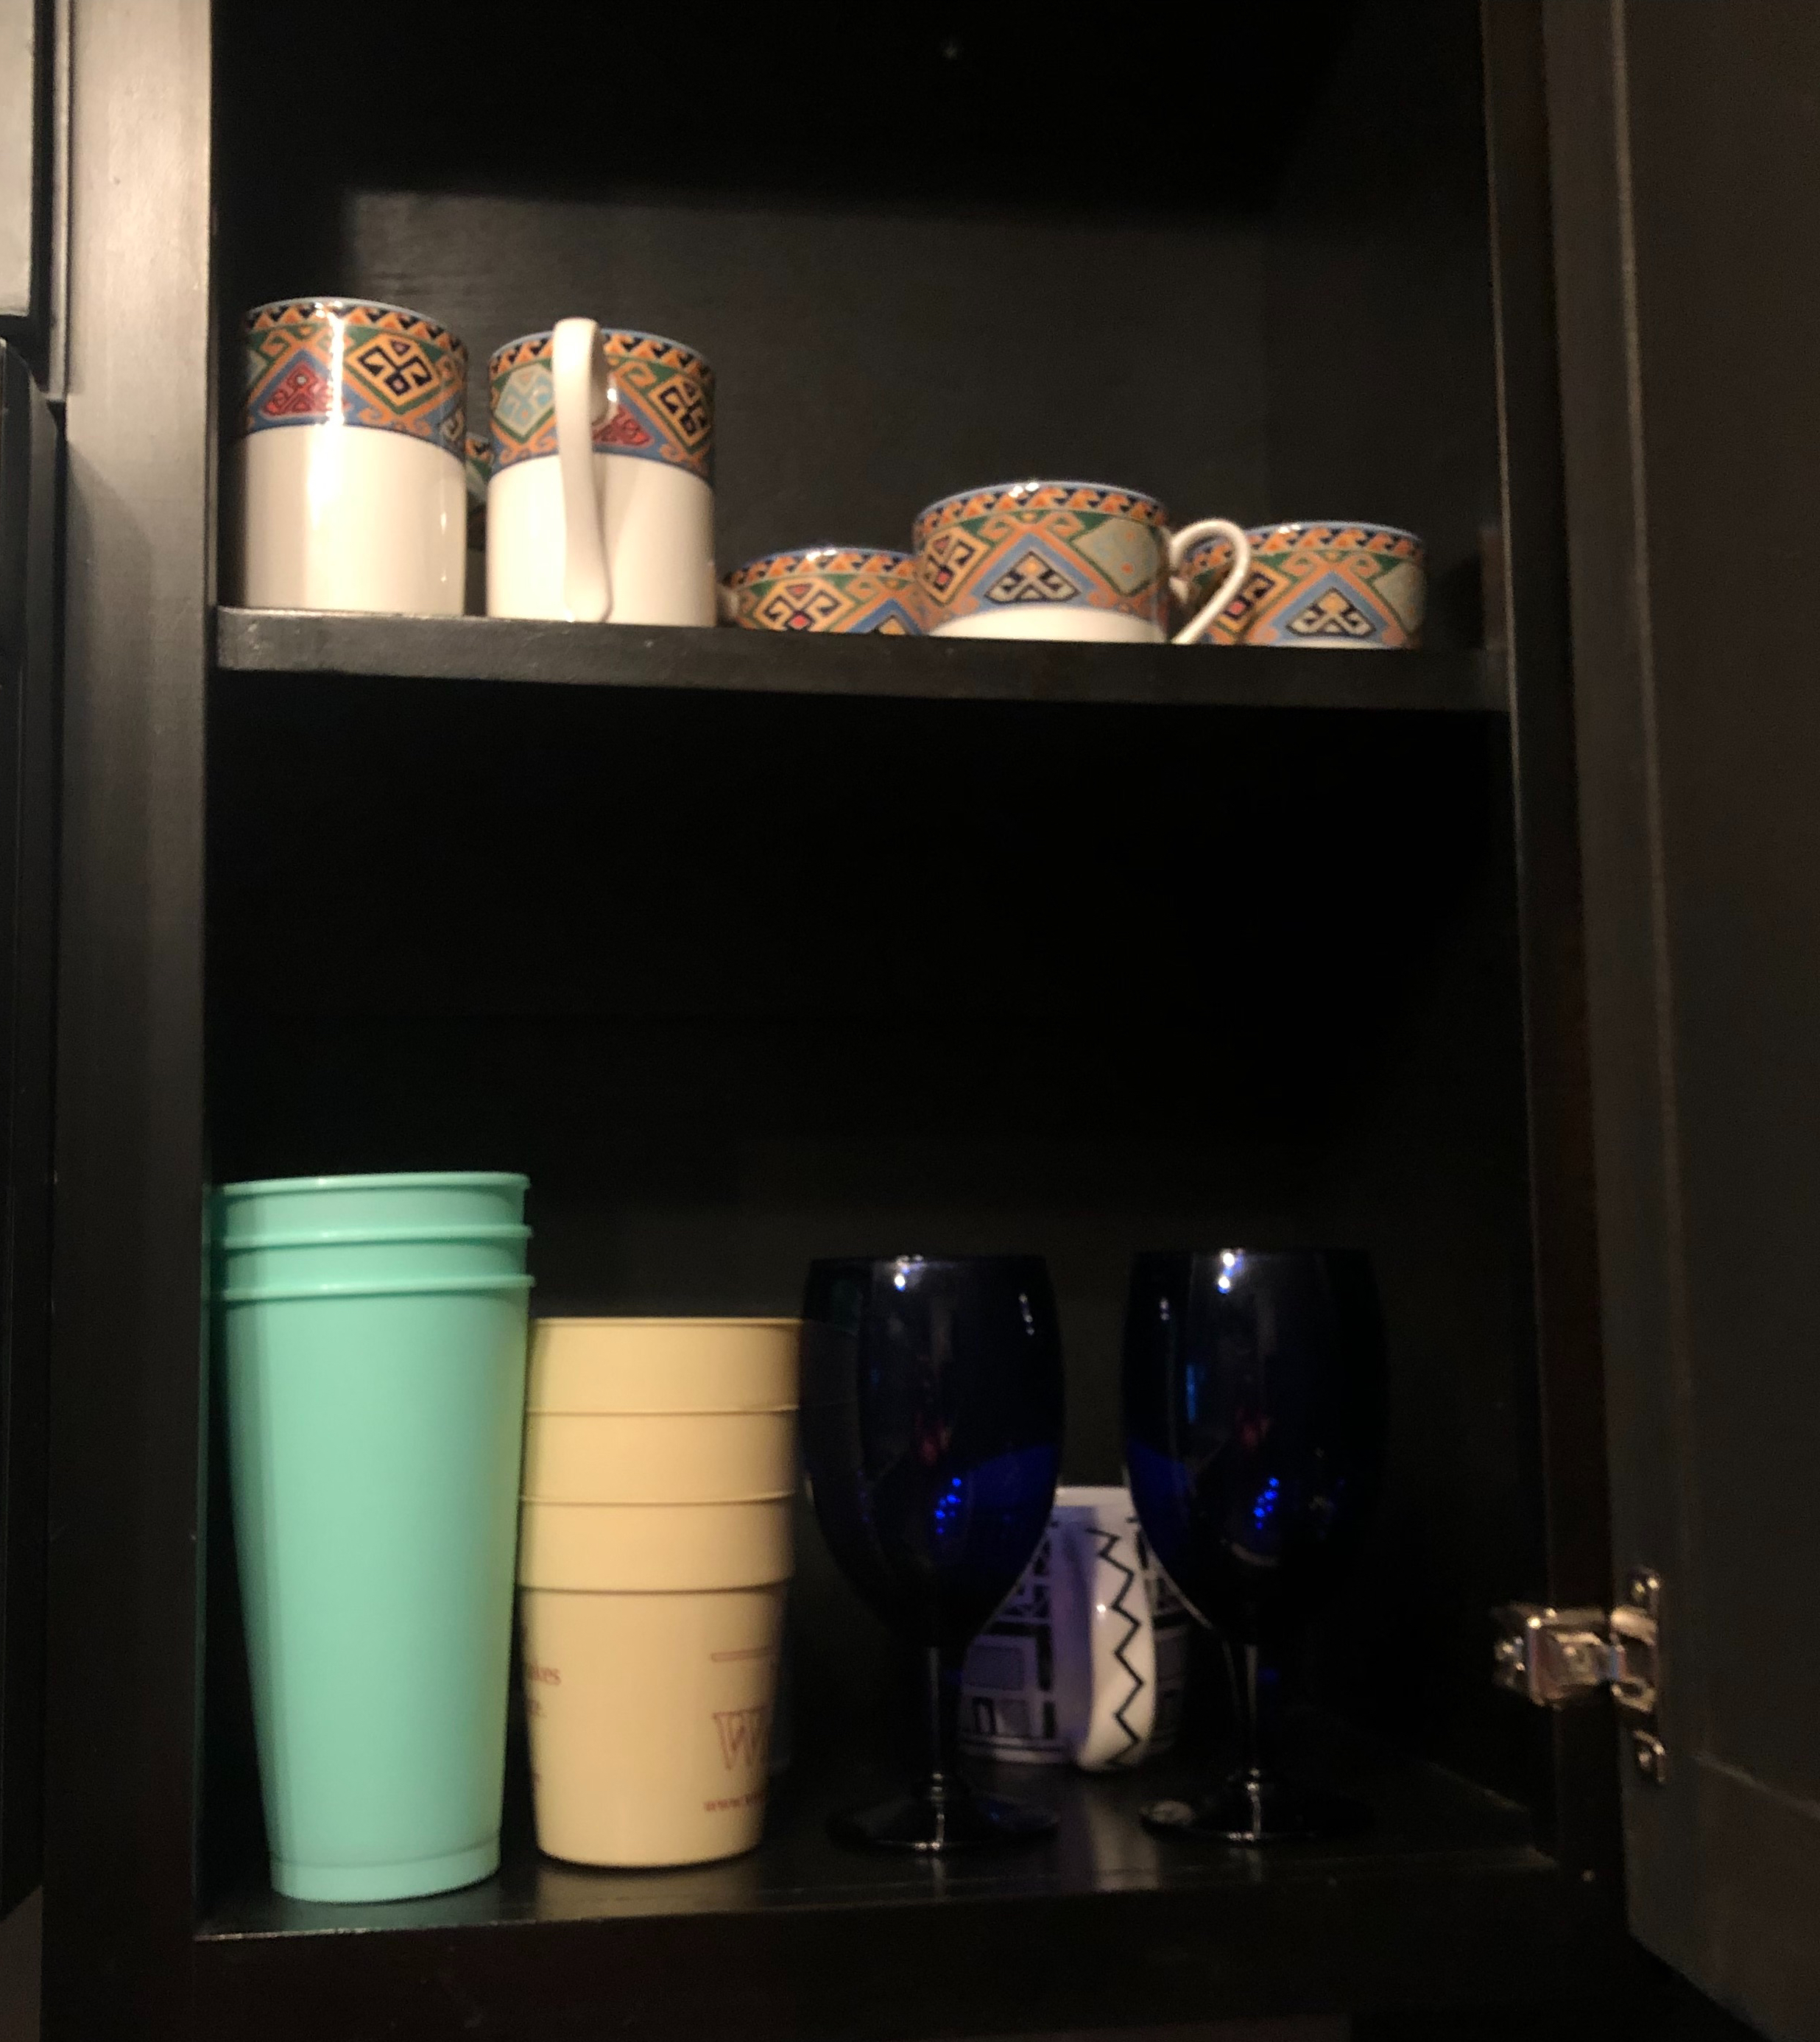 This is a picture of my kitchen cabinet after I spent time organizing it so that way my roommates and I could have easier access to certain cups we might want to use. This is especially good to do on Sunday, so that during the week we don’t have to bother.